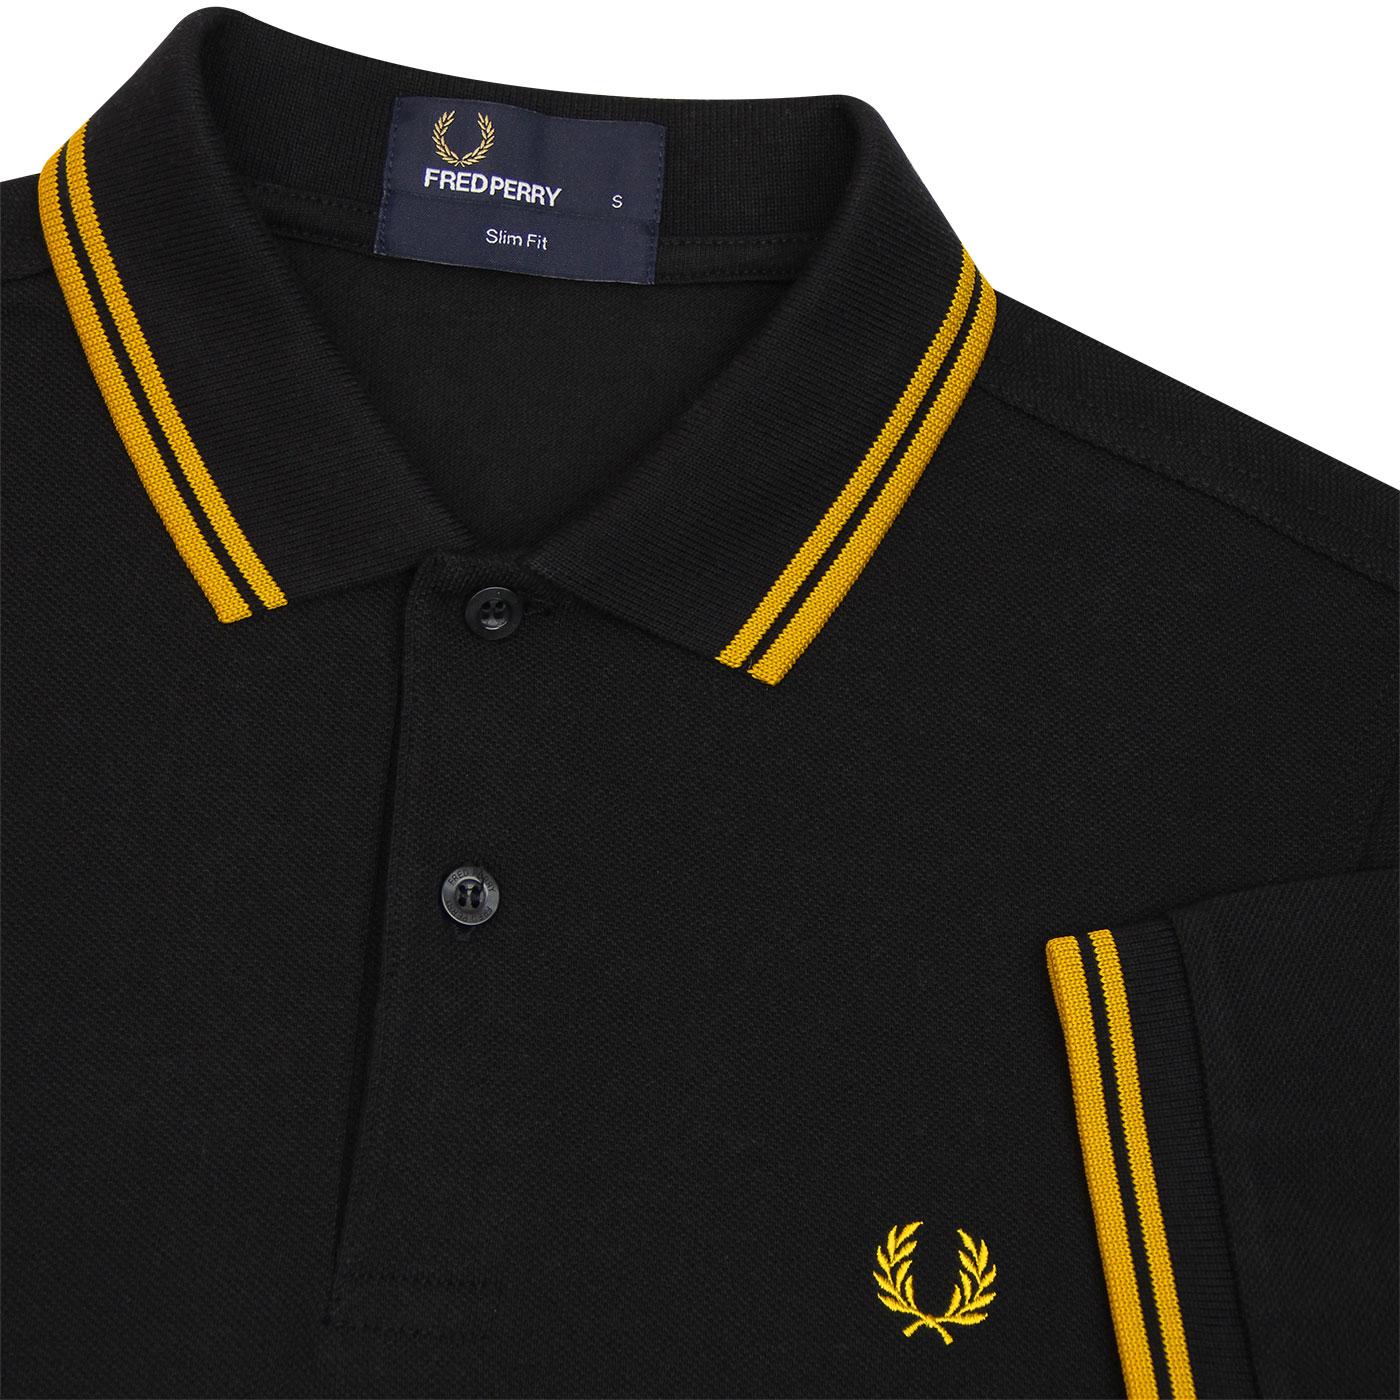 Buy fred perry black yellow yellow twin tipped shirt - OFF 79%